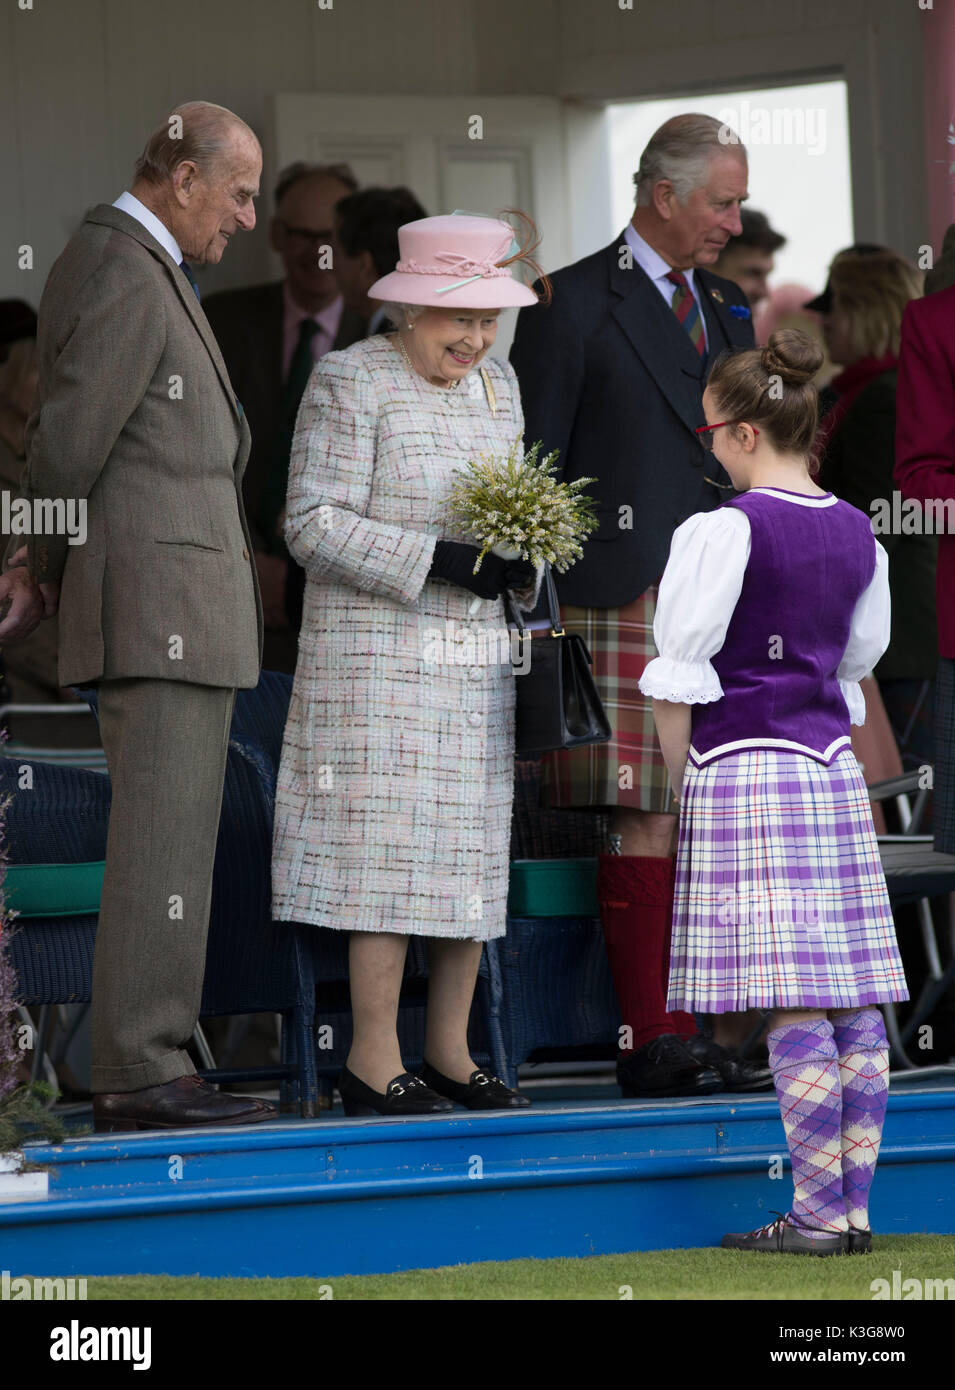 London, UK. 3rd Sep, 2017. British Queen Elizabeth II attends the 2017 Braemar Gathering, an annual traditional Scottish Highland Games, in Braemar, Scotland, Sept. 2, 2017. Credit: Xinhua/Alamy Live News Stock Photo